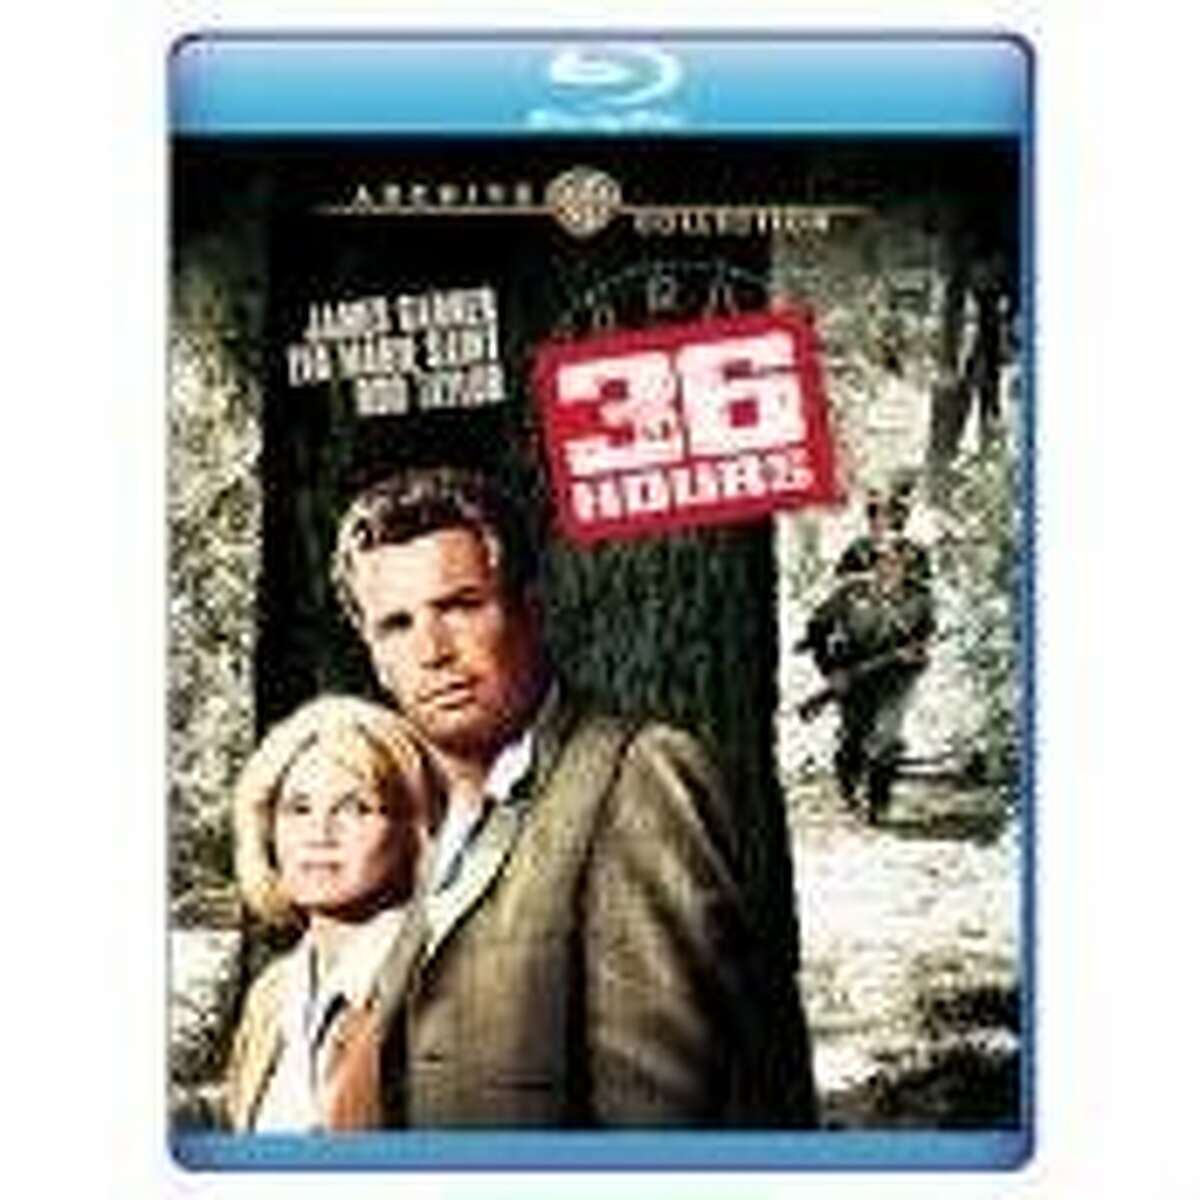 dvd cover: "36 Hours"